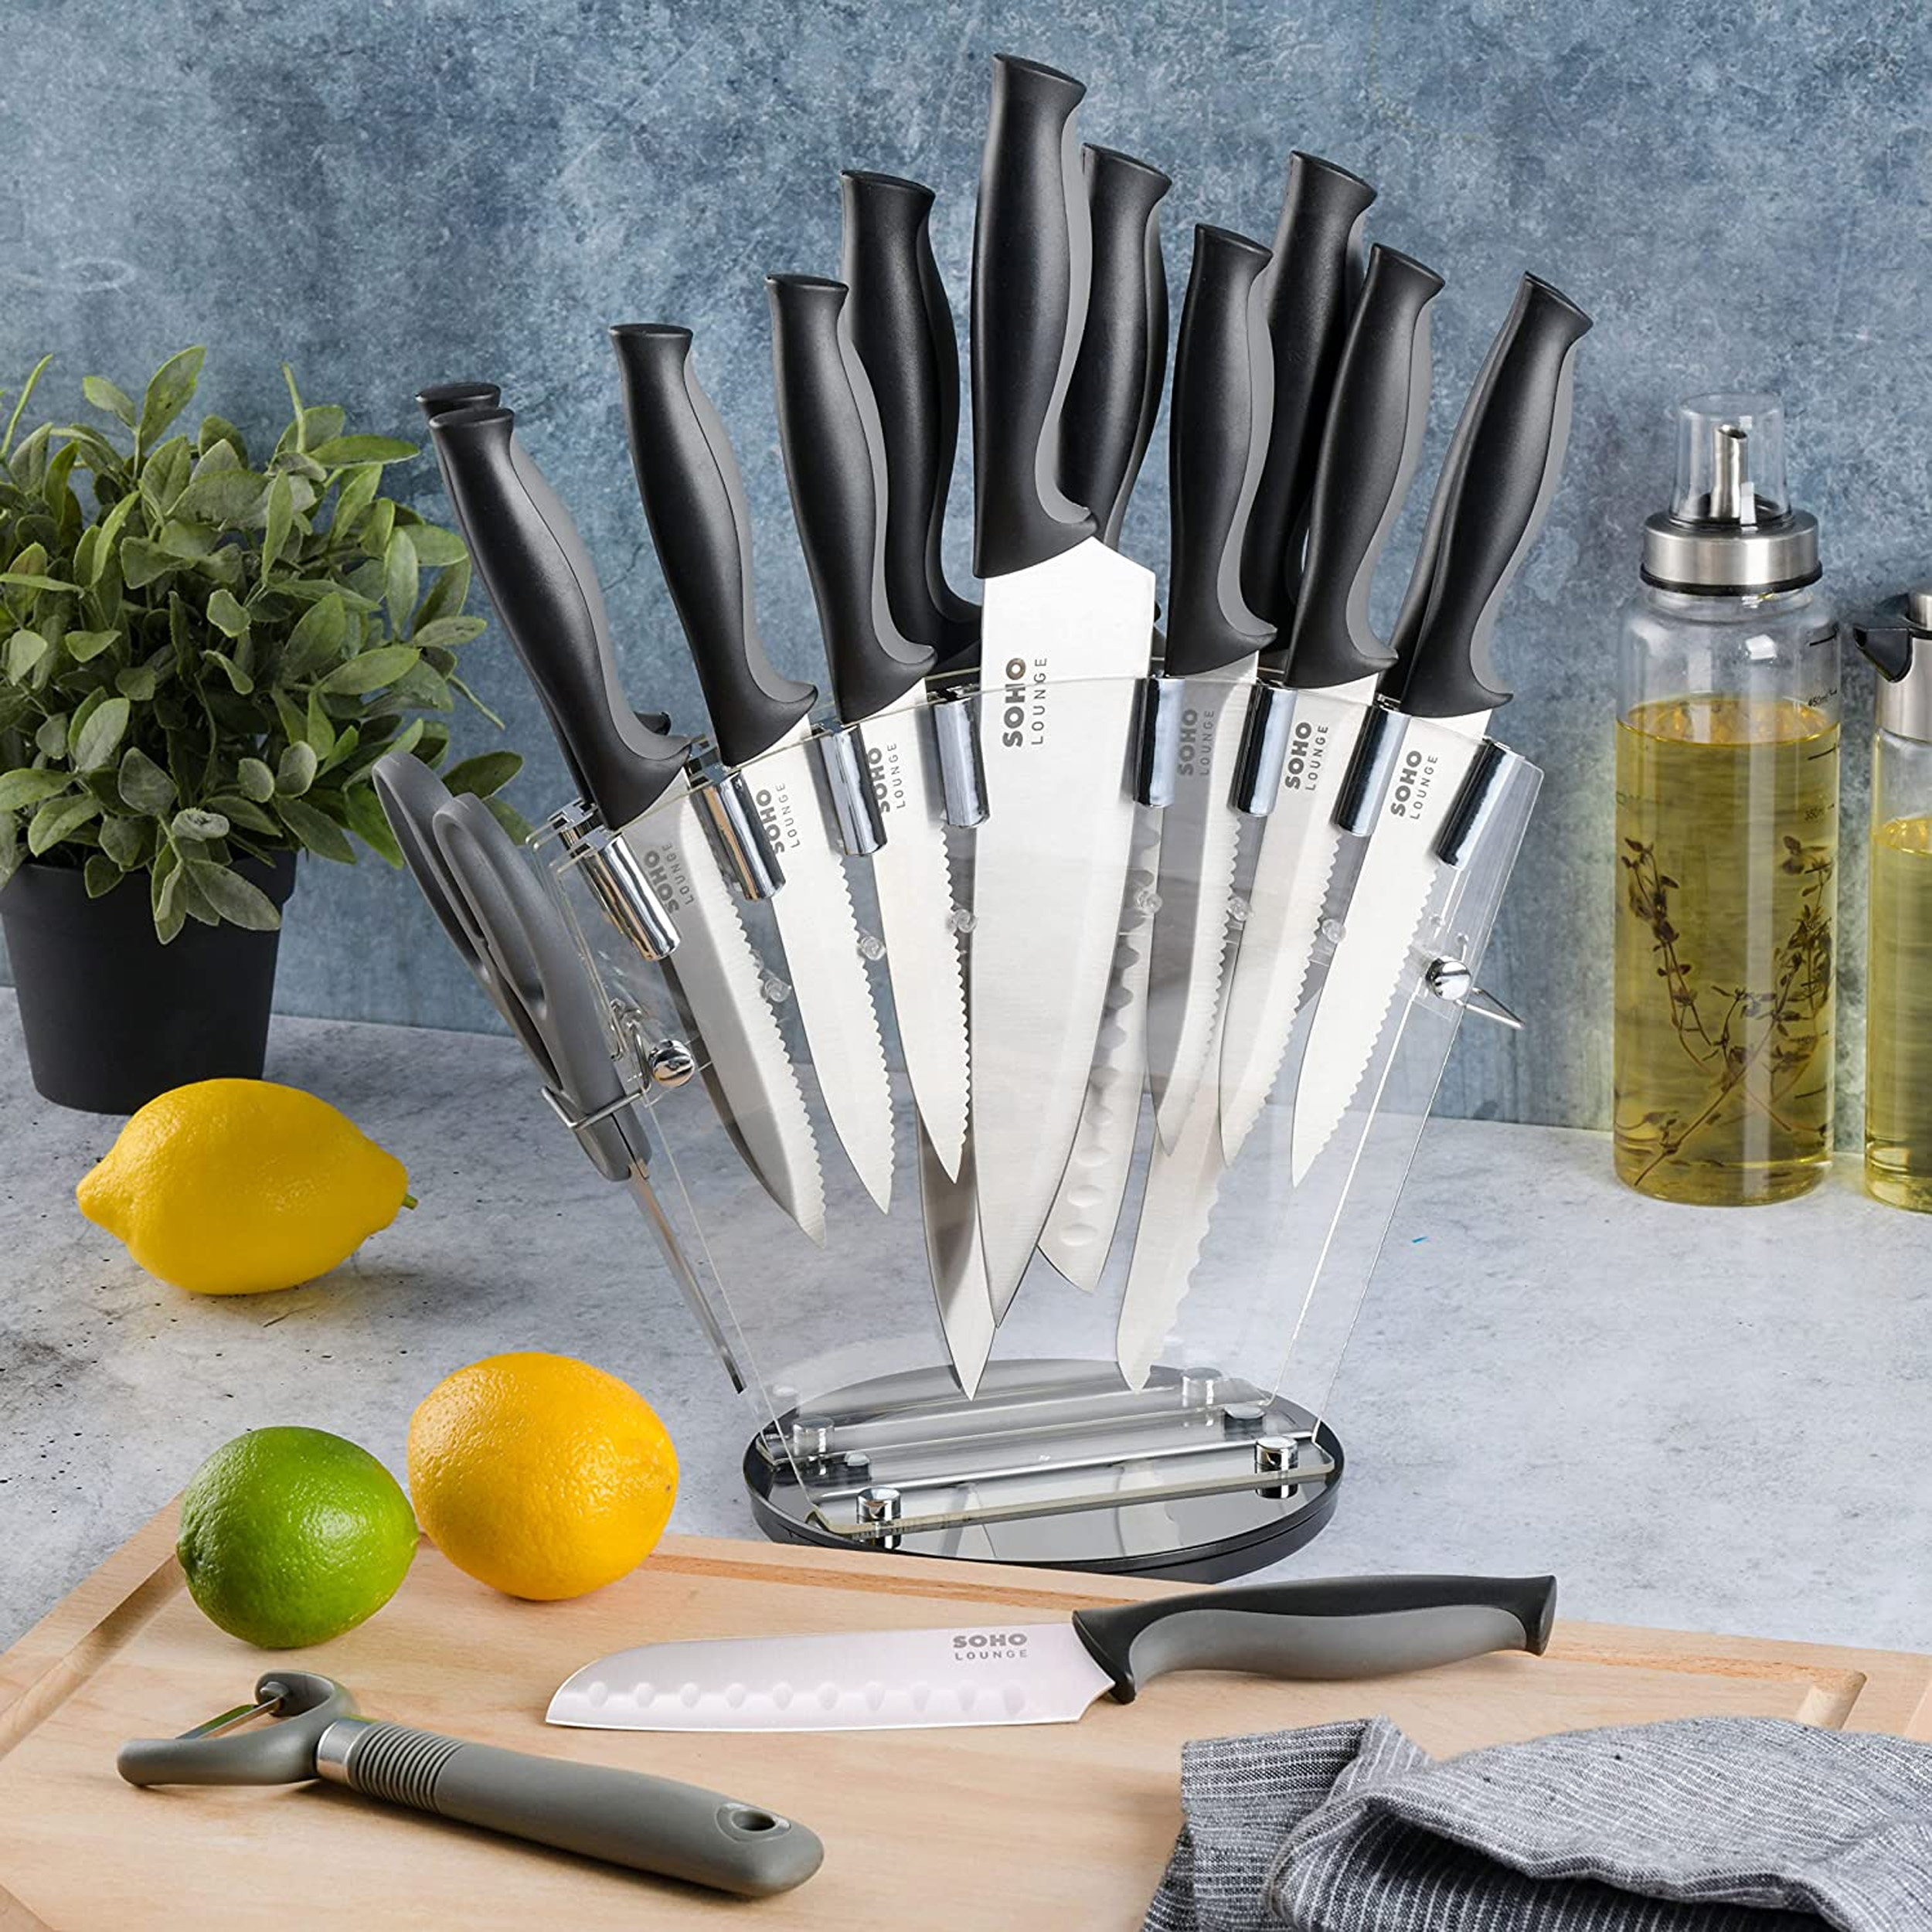 Ceramic Kitchen Knives Set 4 Pieces Knives, Peeler, Cutting Board